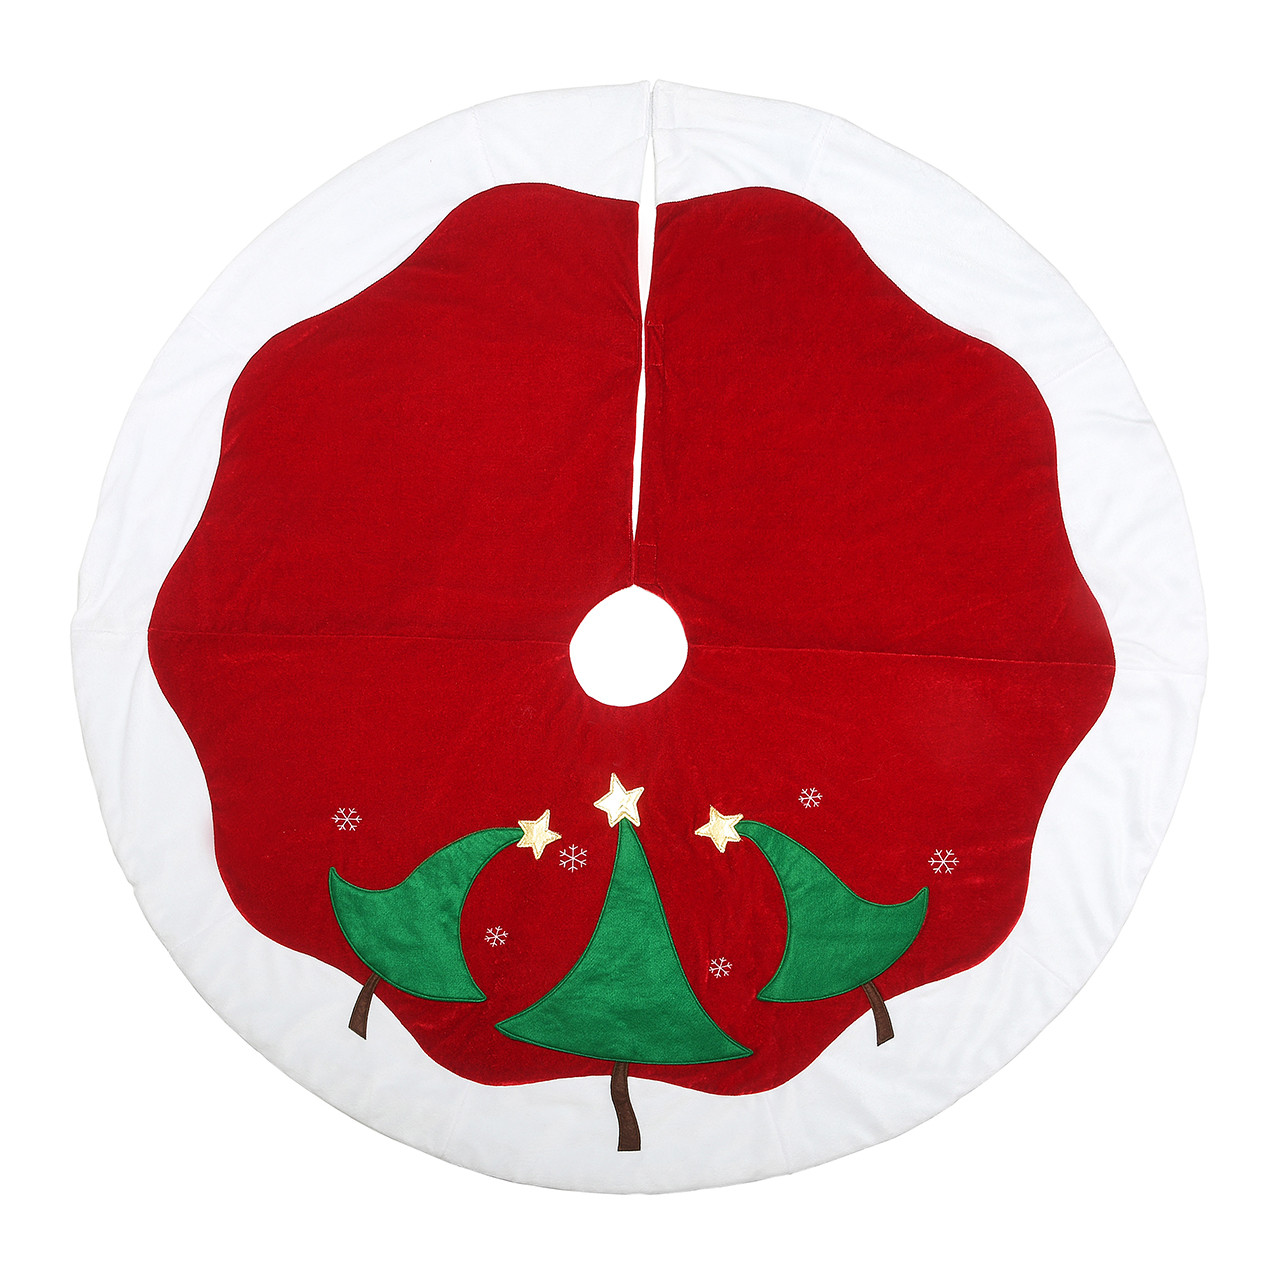 National Tree Company General Store Collection Red and White Christmas Tree Skirt